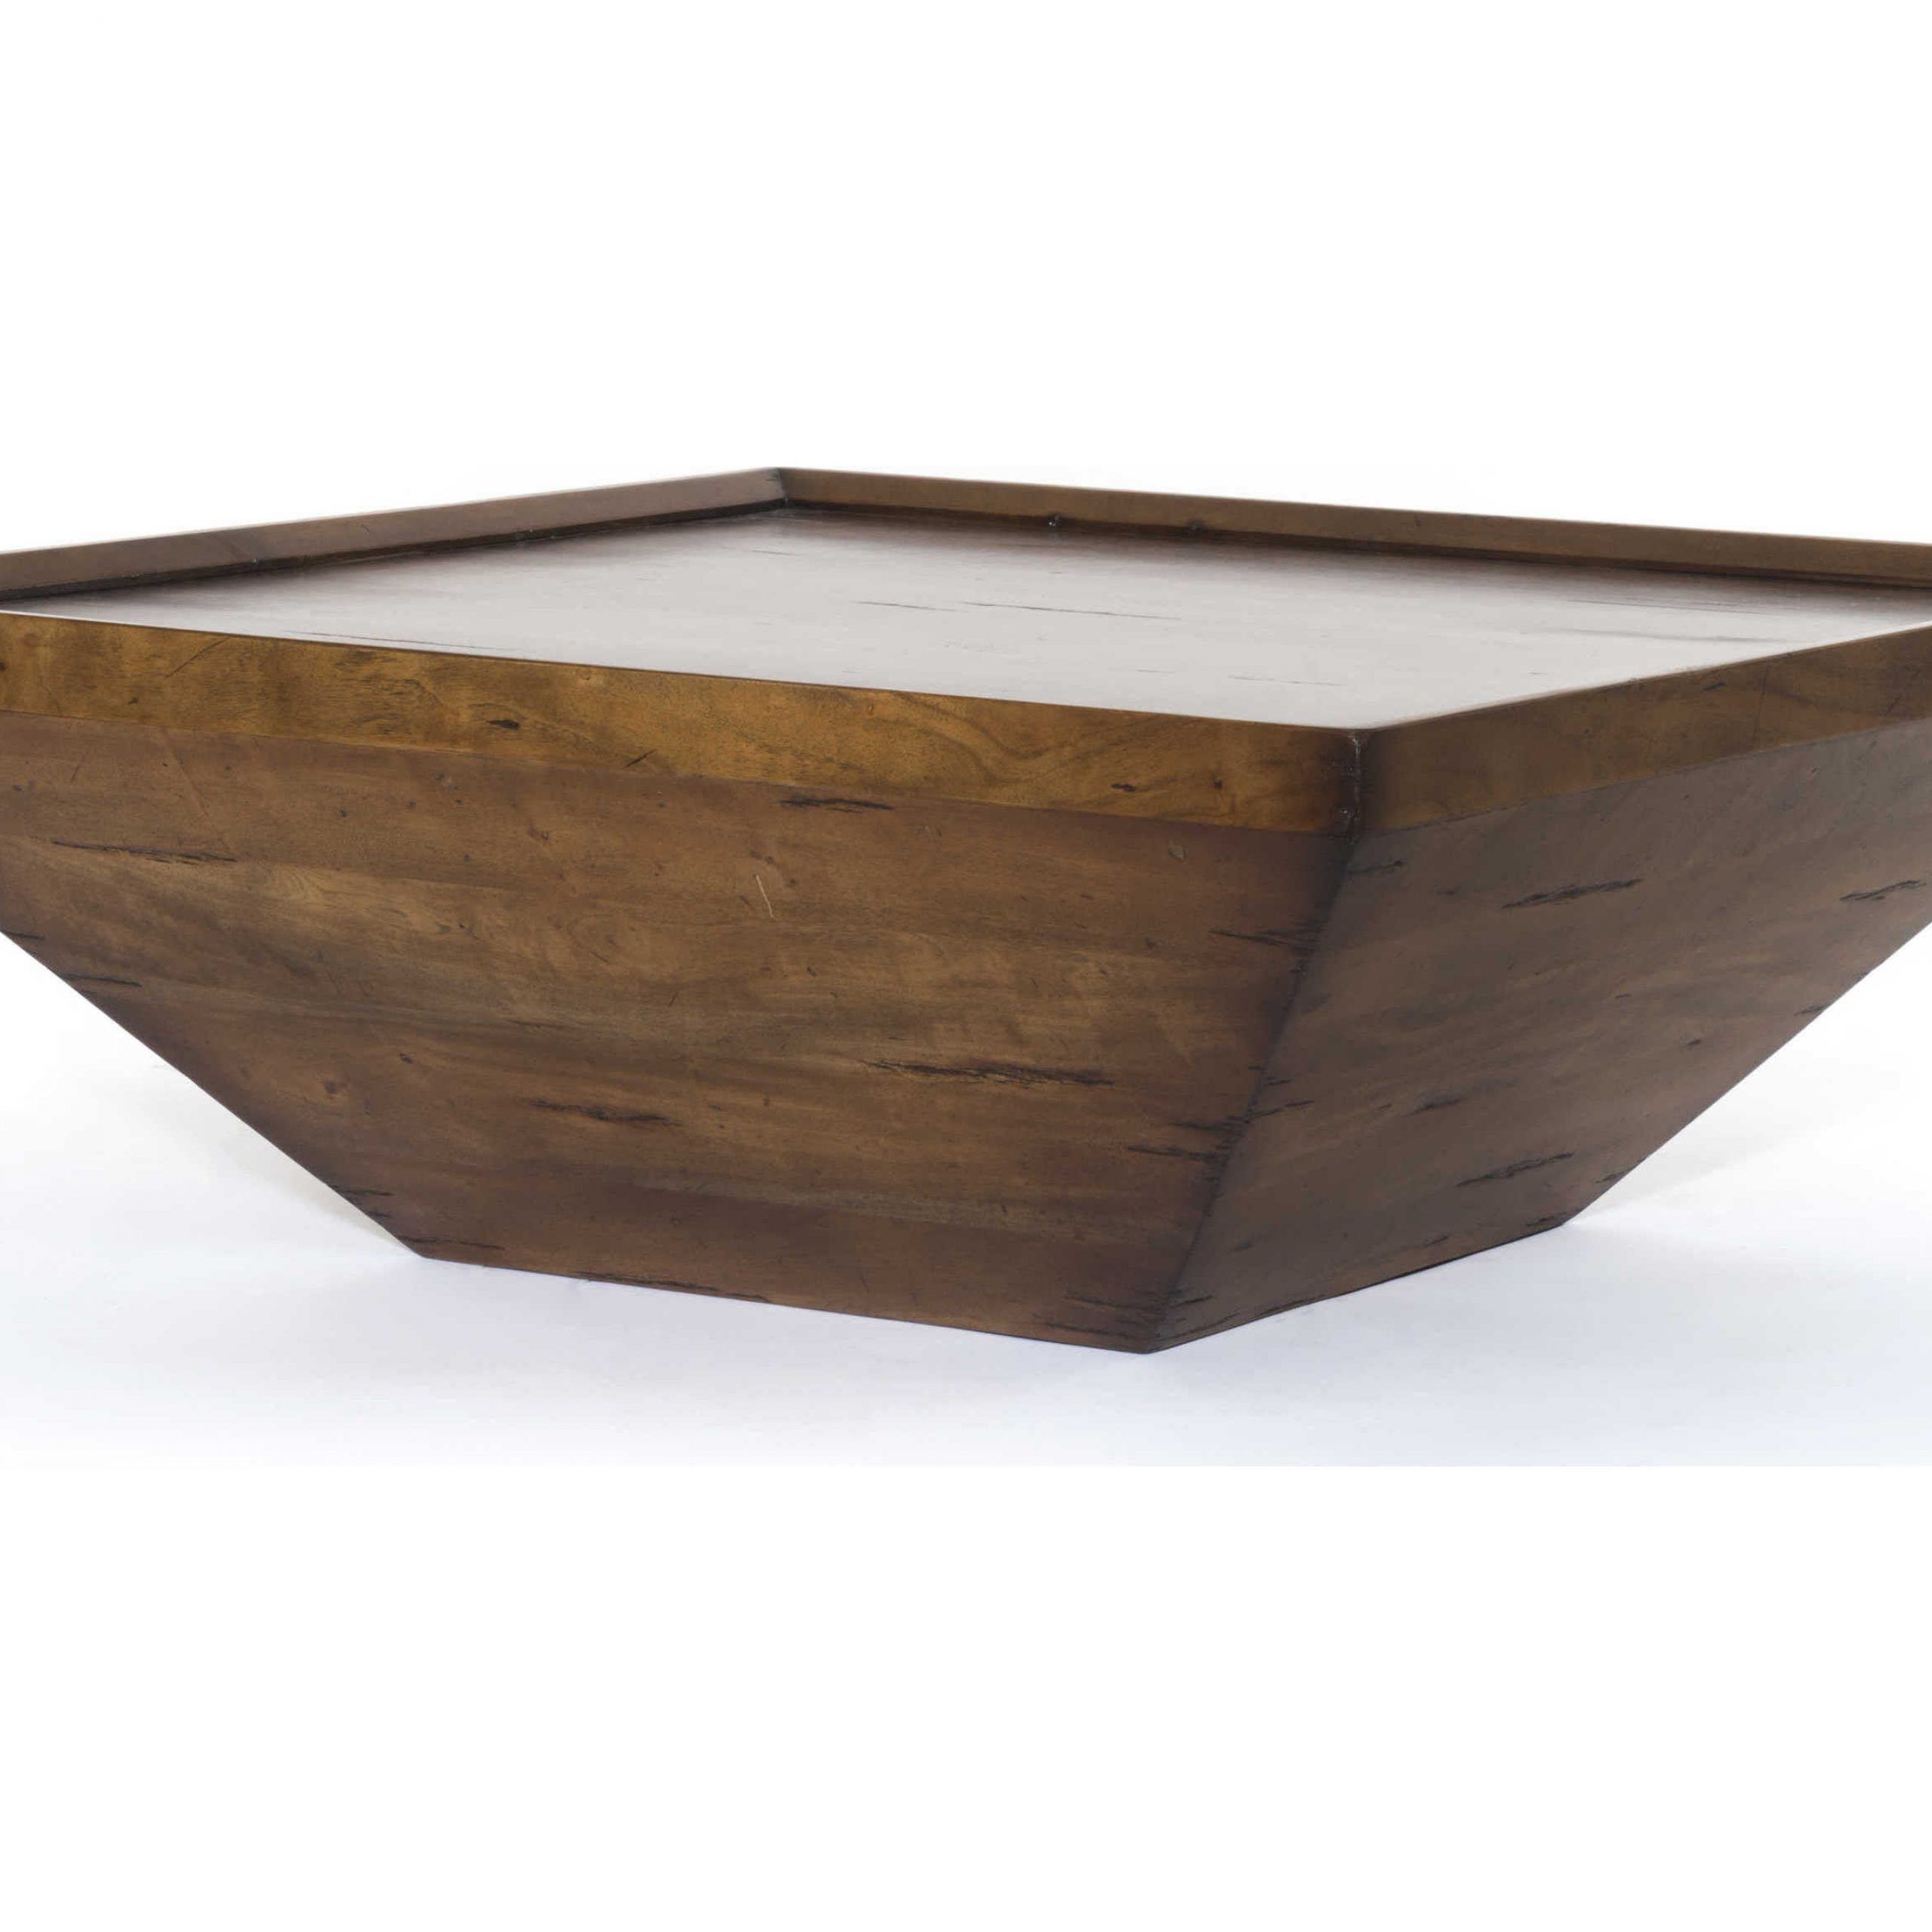 Four Hands Harmon Reclaimed Fruitwood 42'' Wide Square Coffee Table |  Fsihrm047 With Regard To Reclaimed Fruitwood Coffee Tables (View 5 of 20)